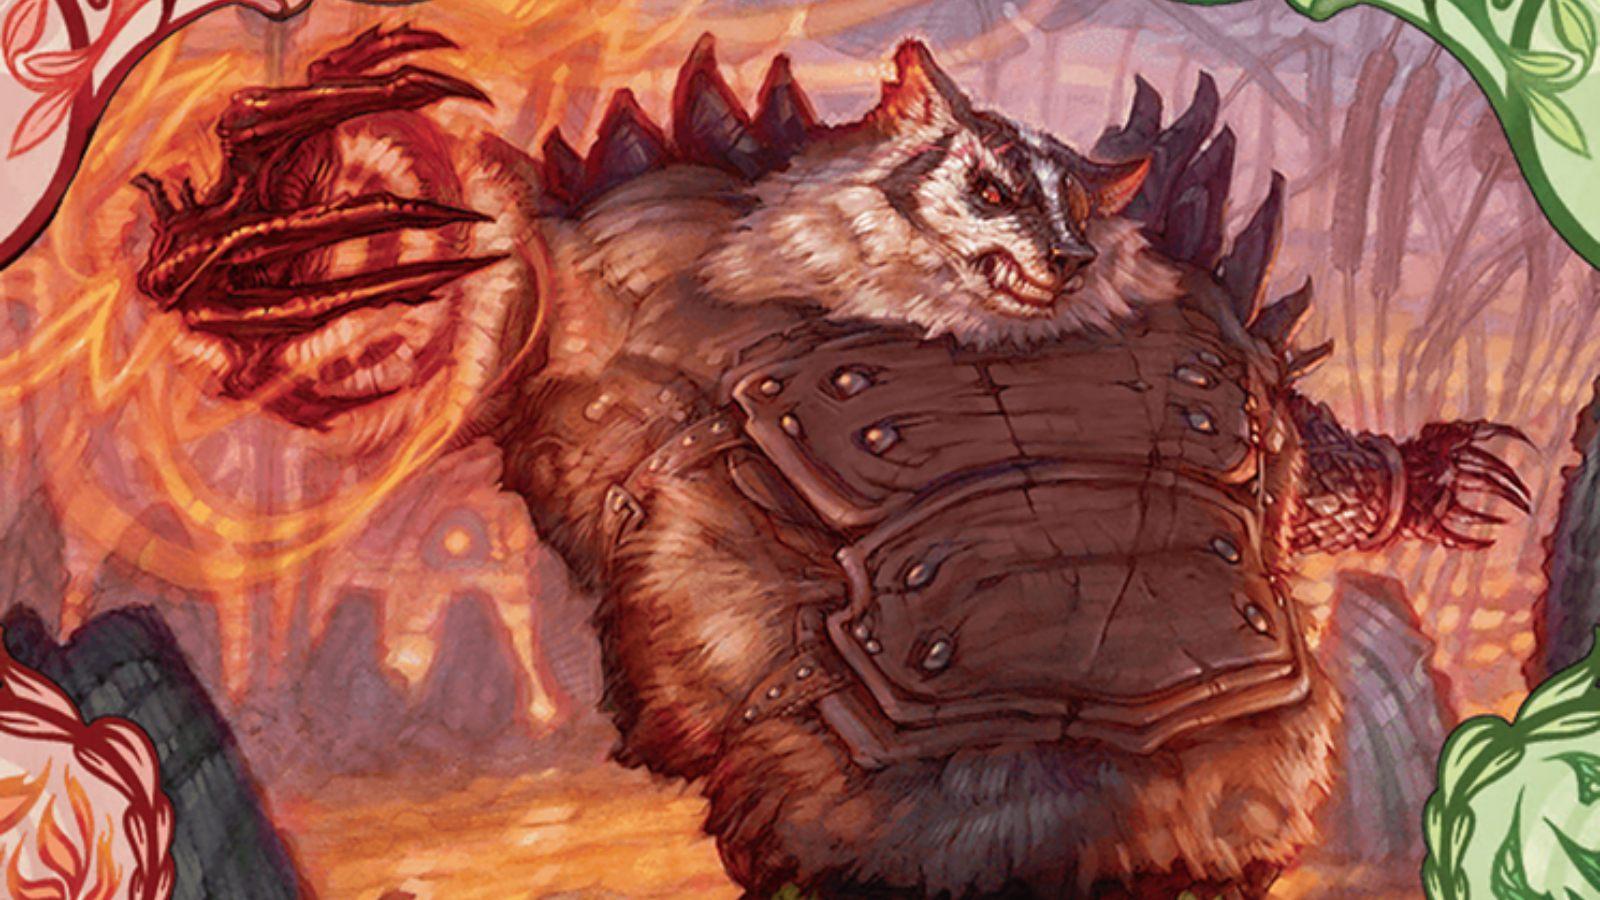 MTG Hugs, Grizzly Guardian